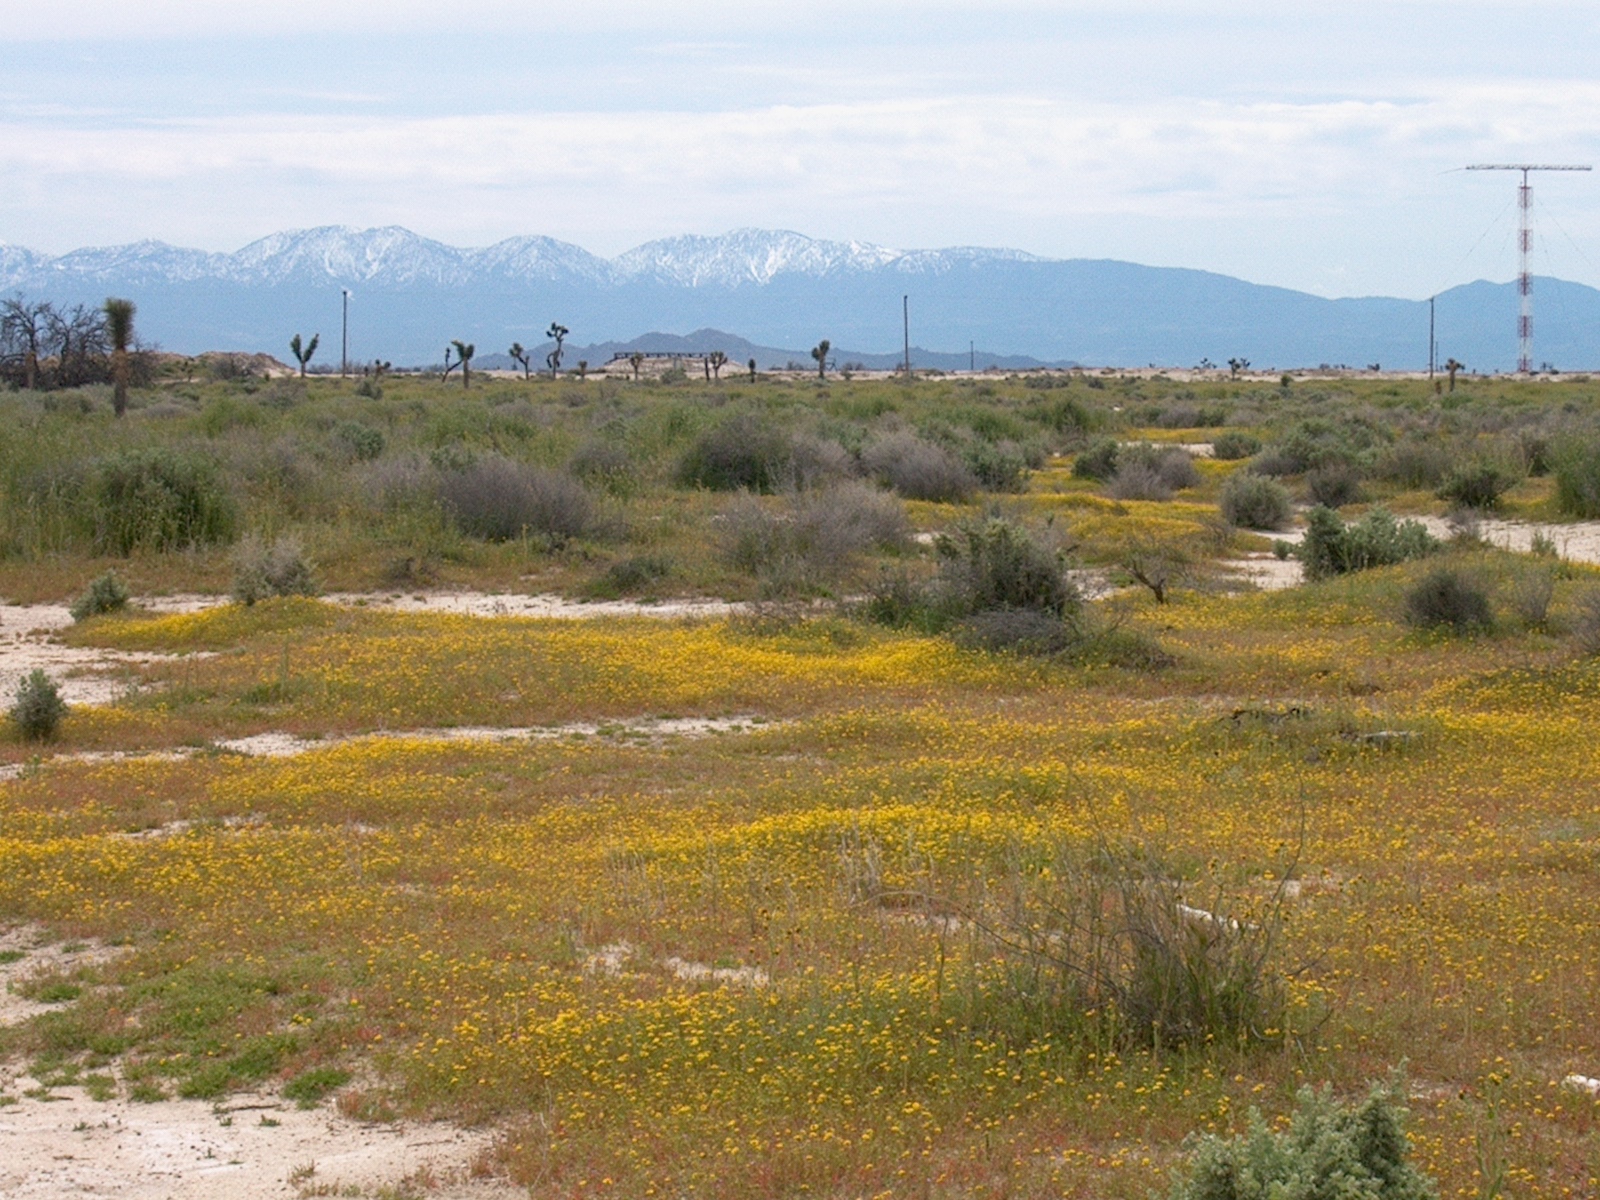 Yellow desert flowers in foreground, joshua trees and snowy mountains in background